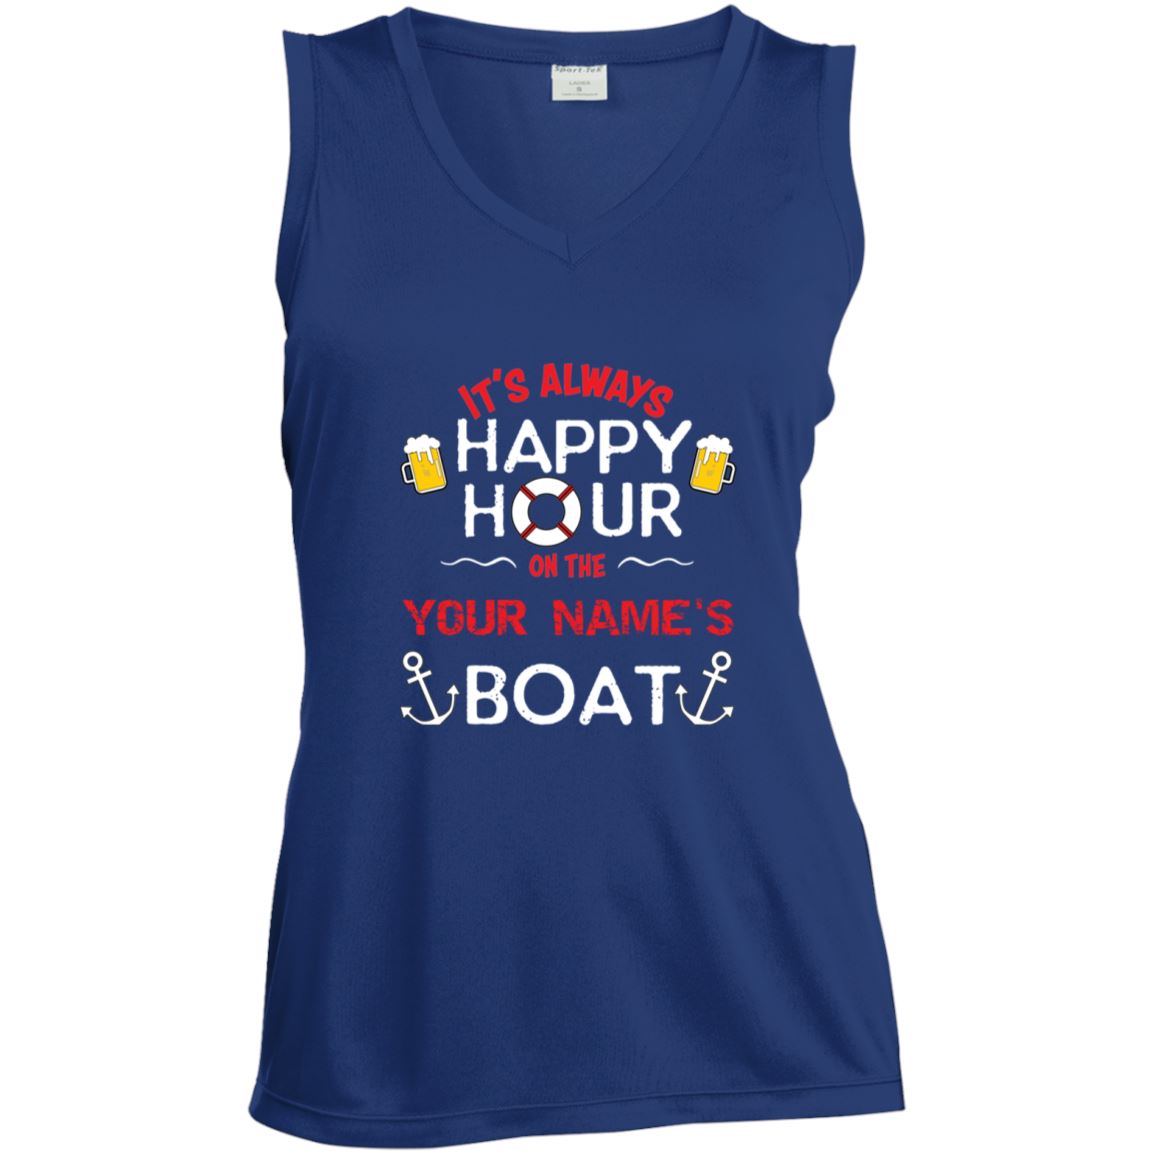 It's Always Happy Hour On Your Boat LST352 Ladies' Sleeveless Moisture Absorbing V-Neck - Houseboat Kings